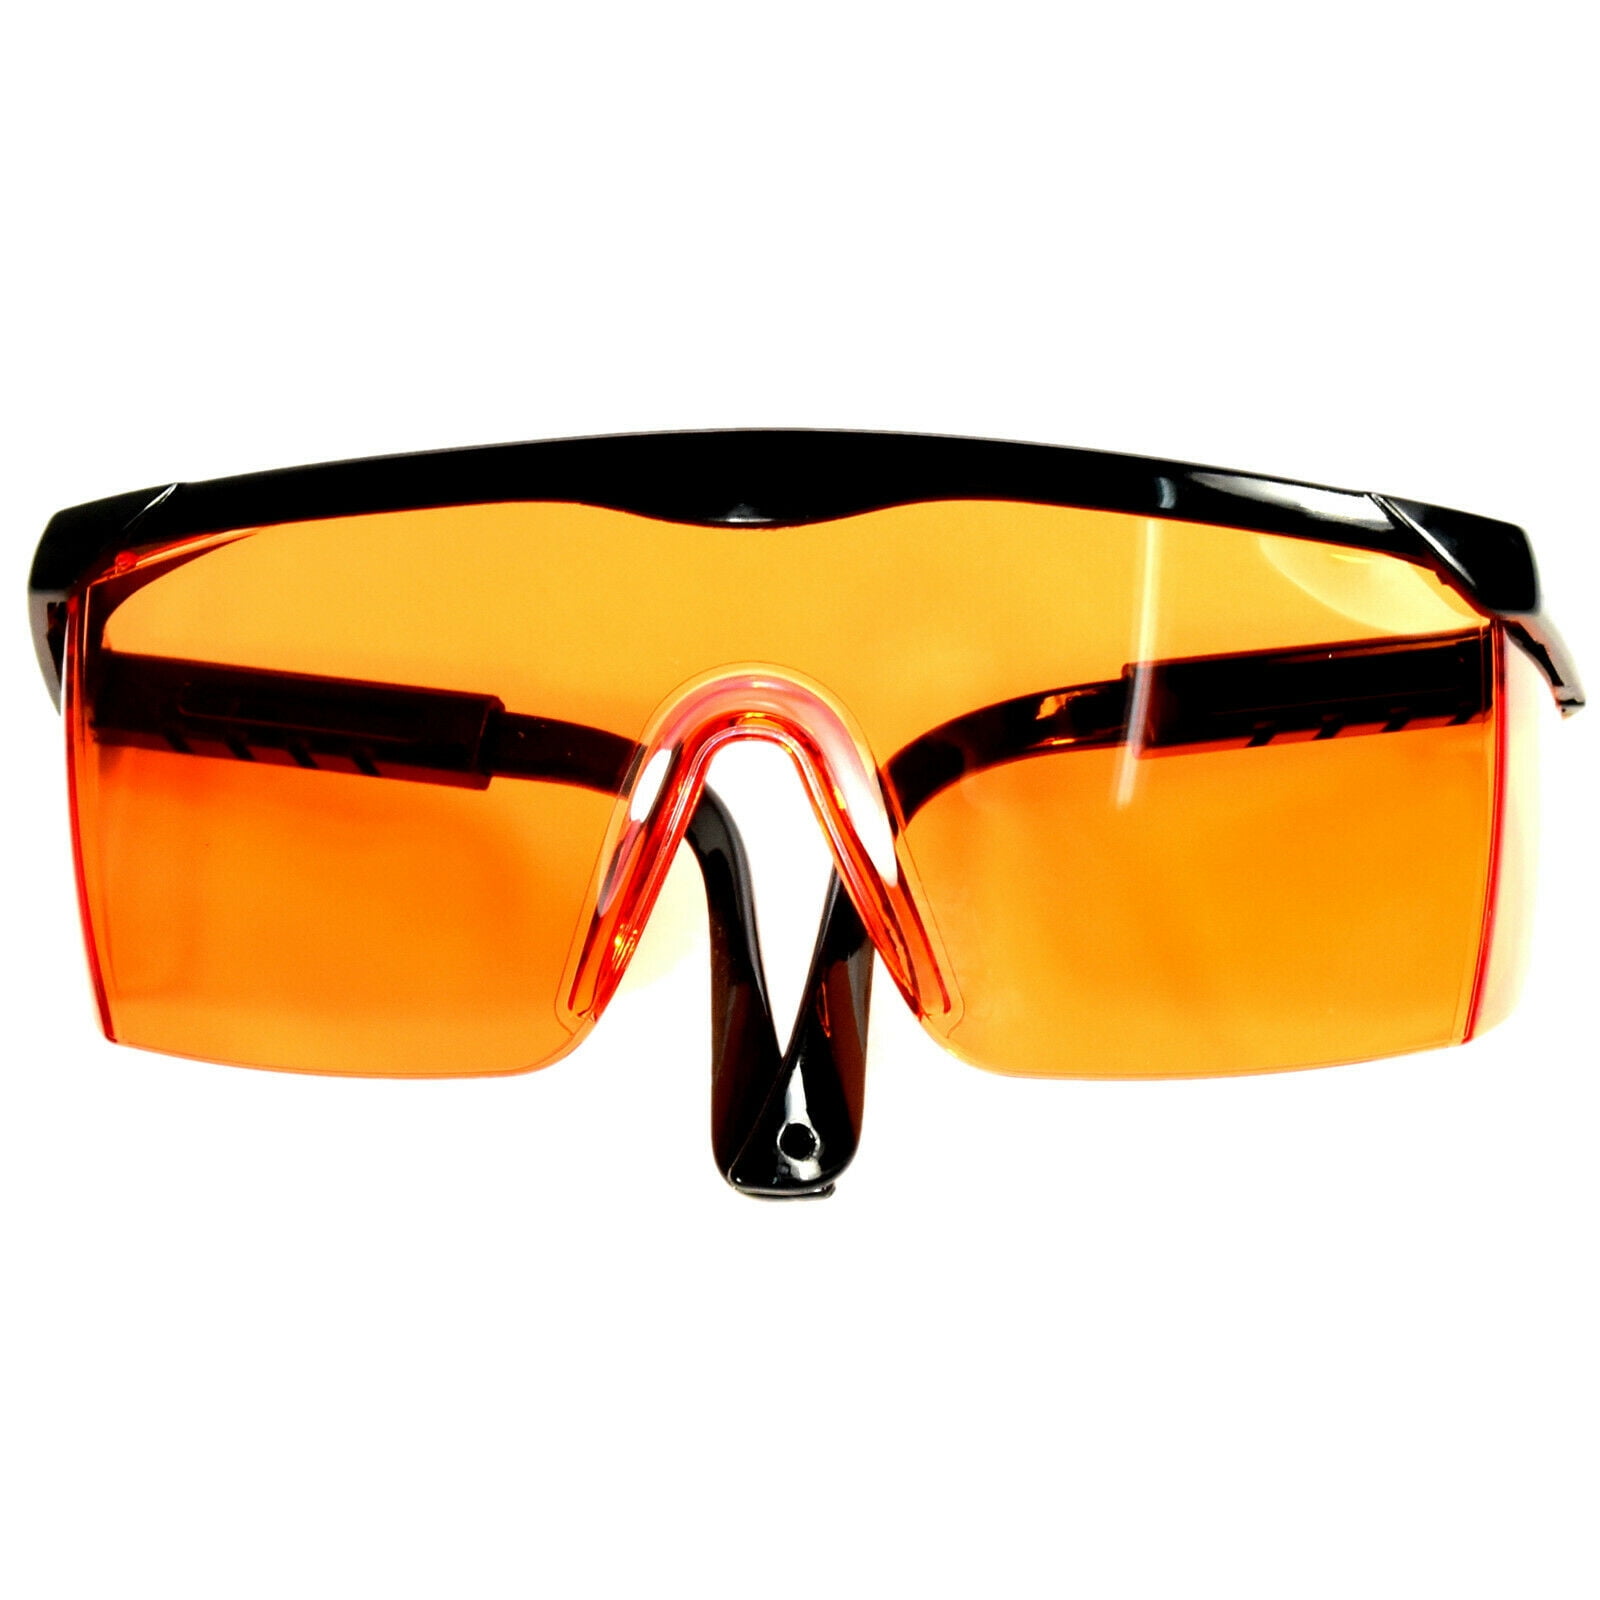 Details about   Safety Glasses Hunting Shooting Motorcycle Range Eye Protection Sunglasses / 